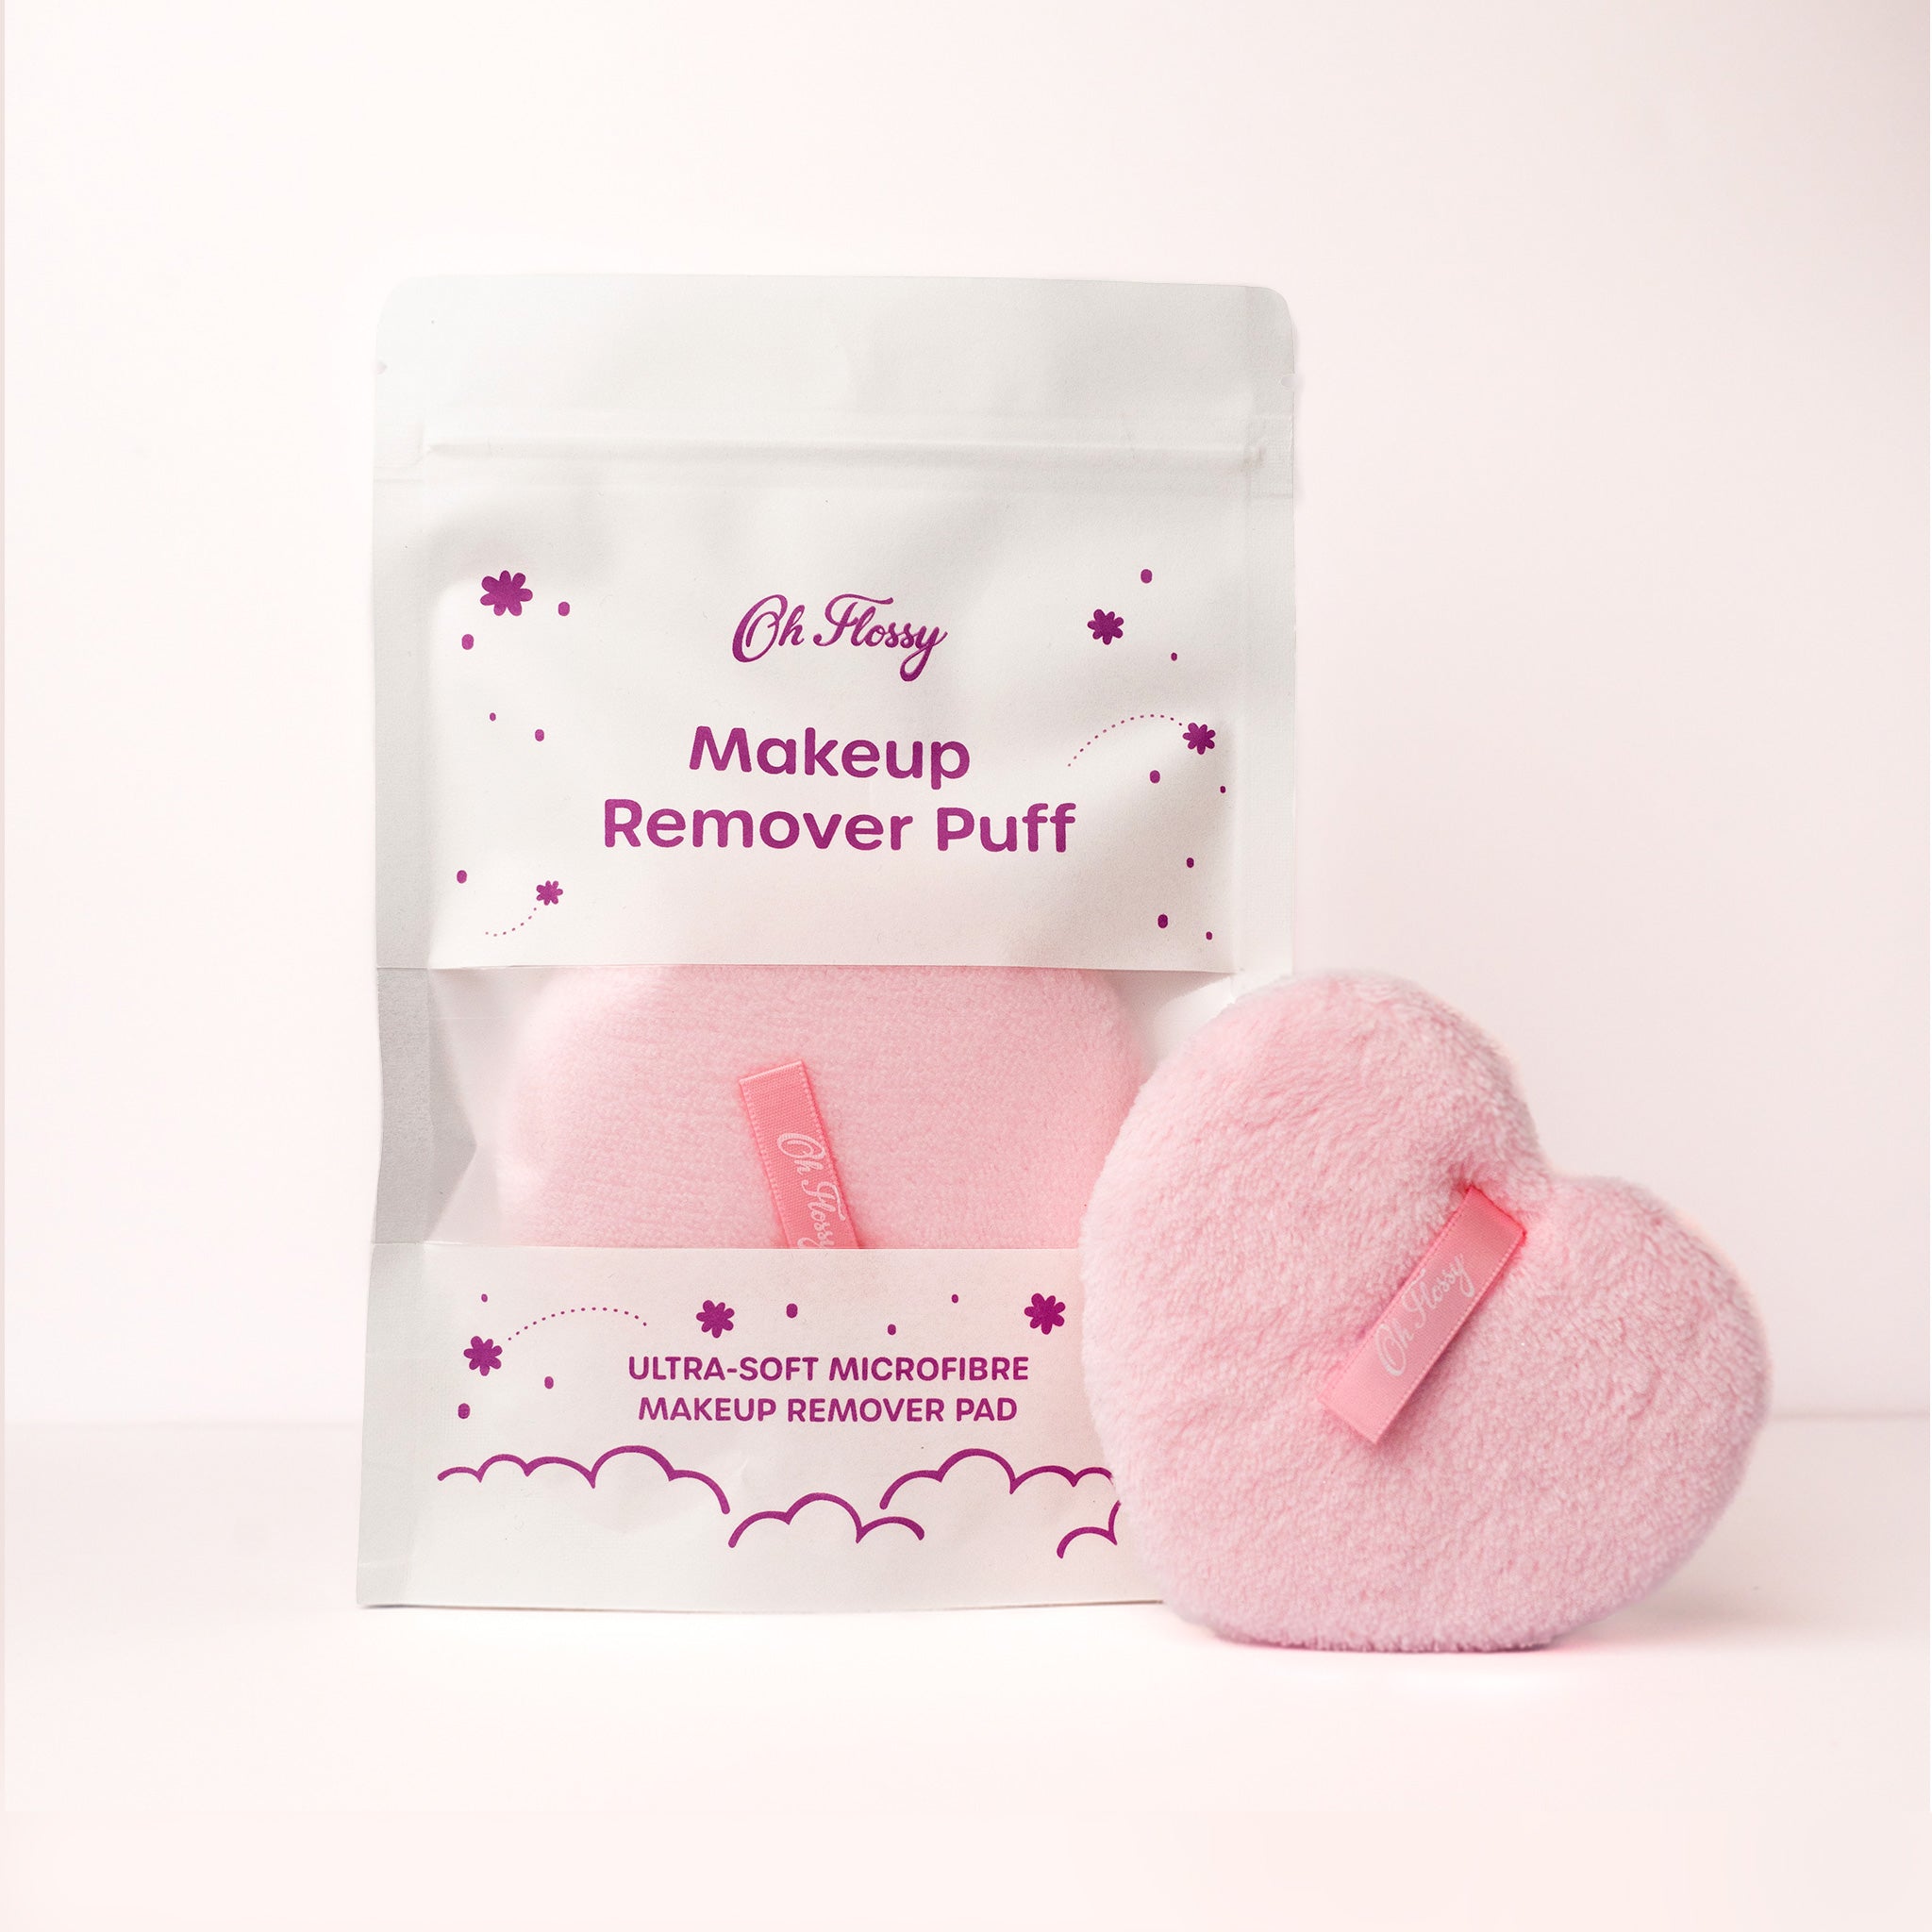 Oh Flossy Makeup Remover Puff - Toybox Tales